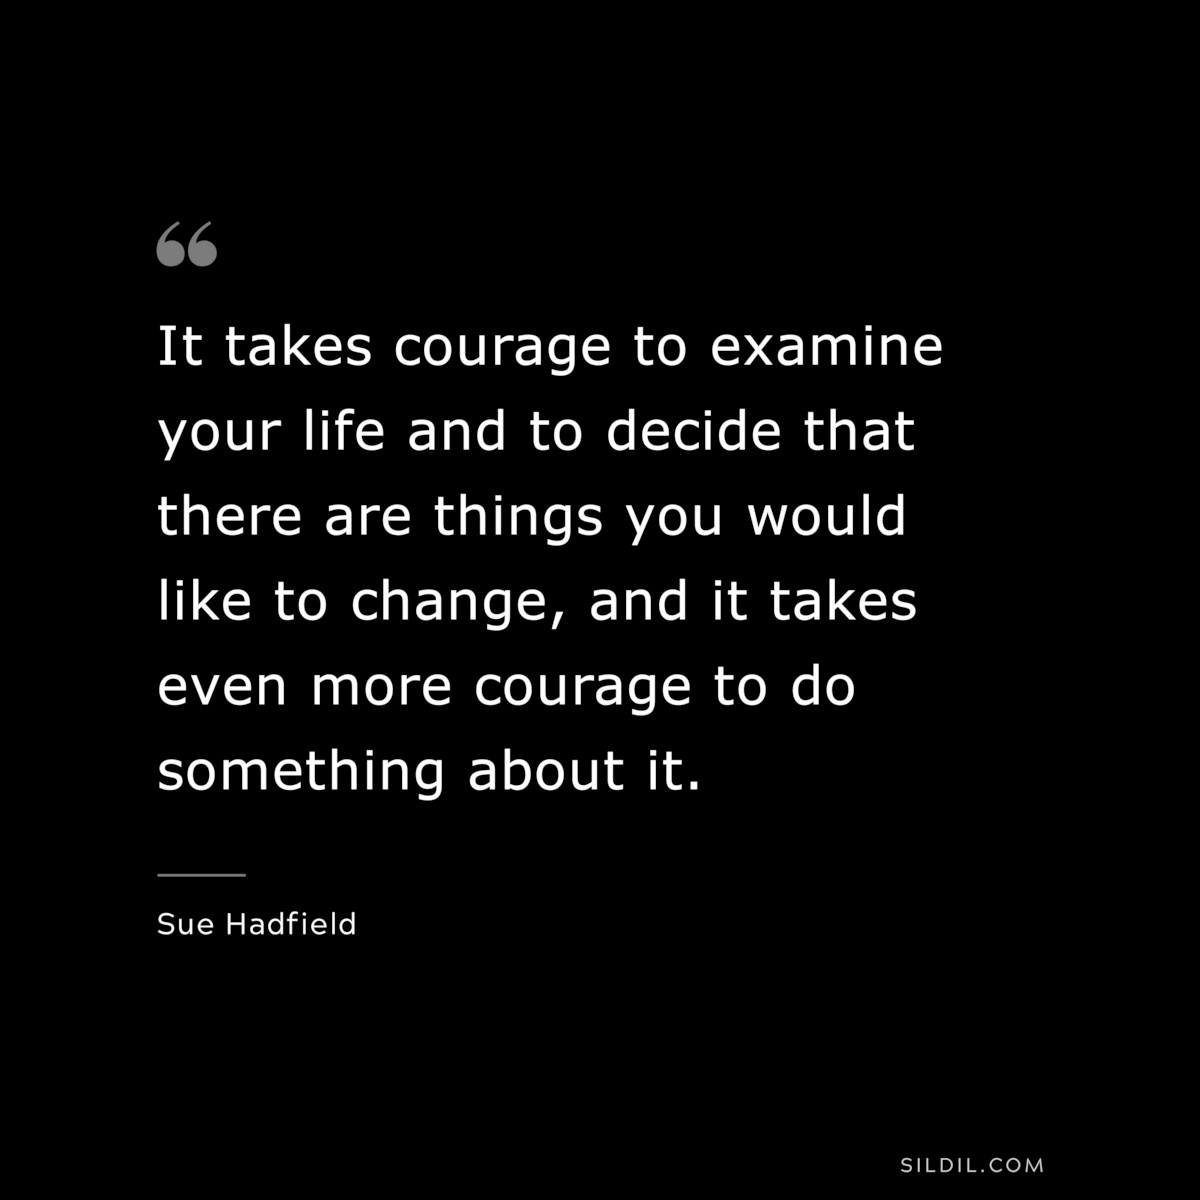 It takes courage to examine your life and to decide that there are things you would like to change, and it takes even more courage to do something about it. ― Sue Hadfield